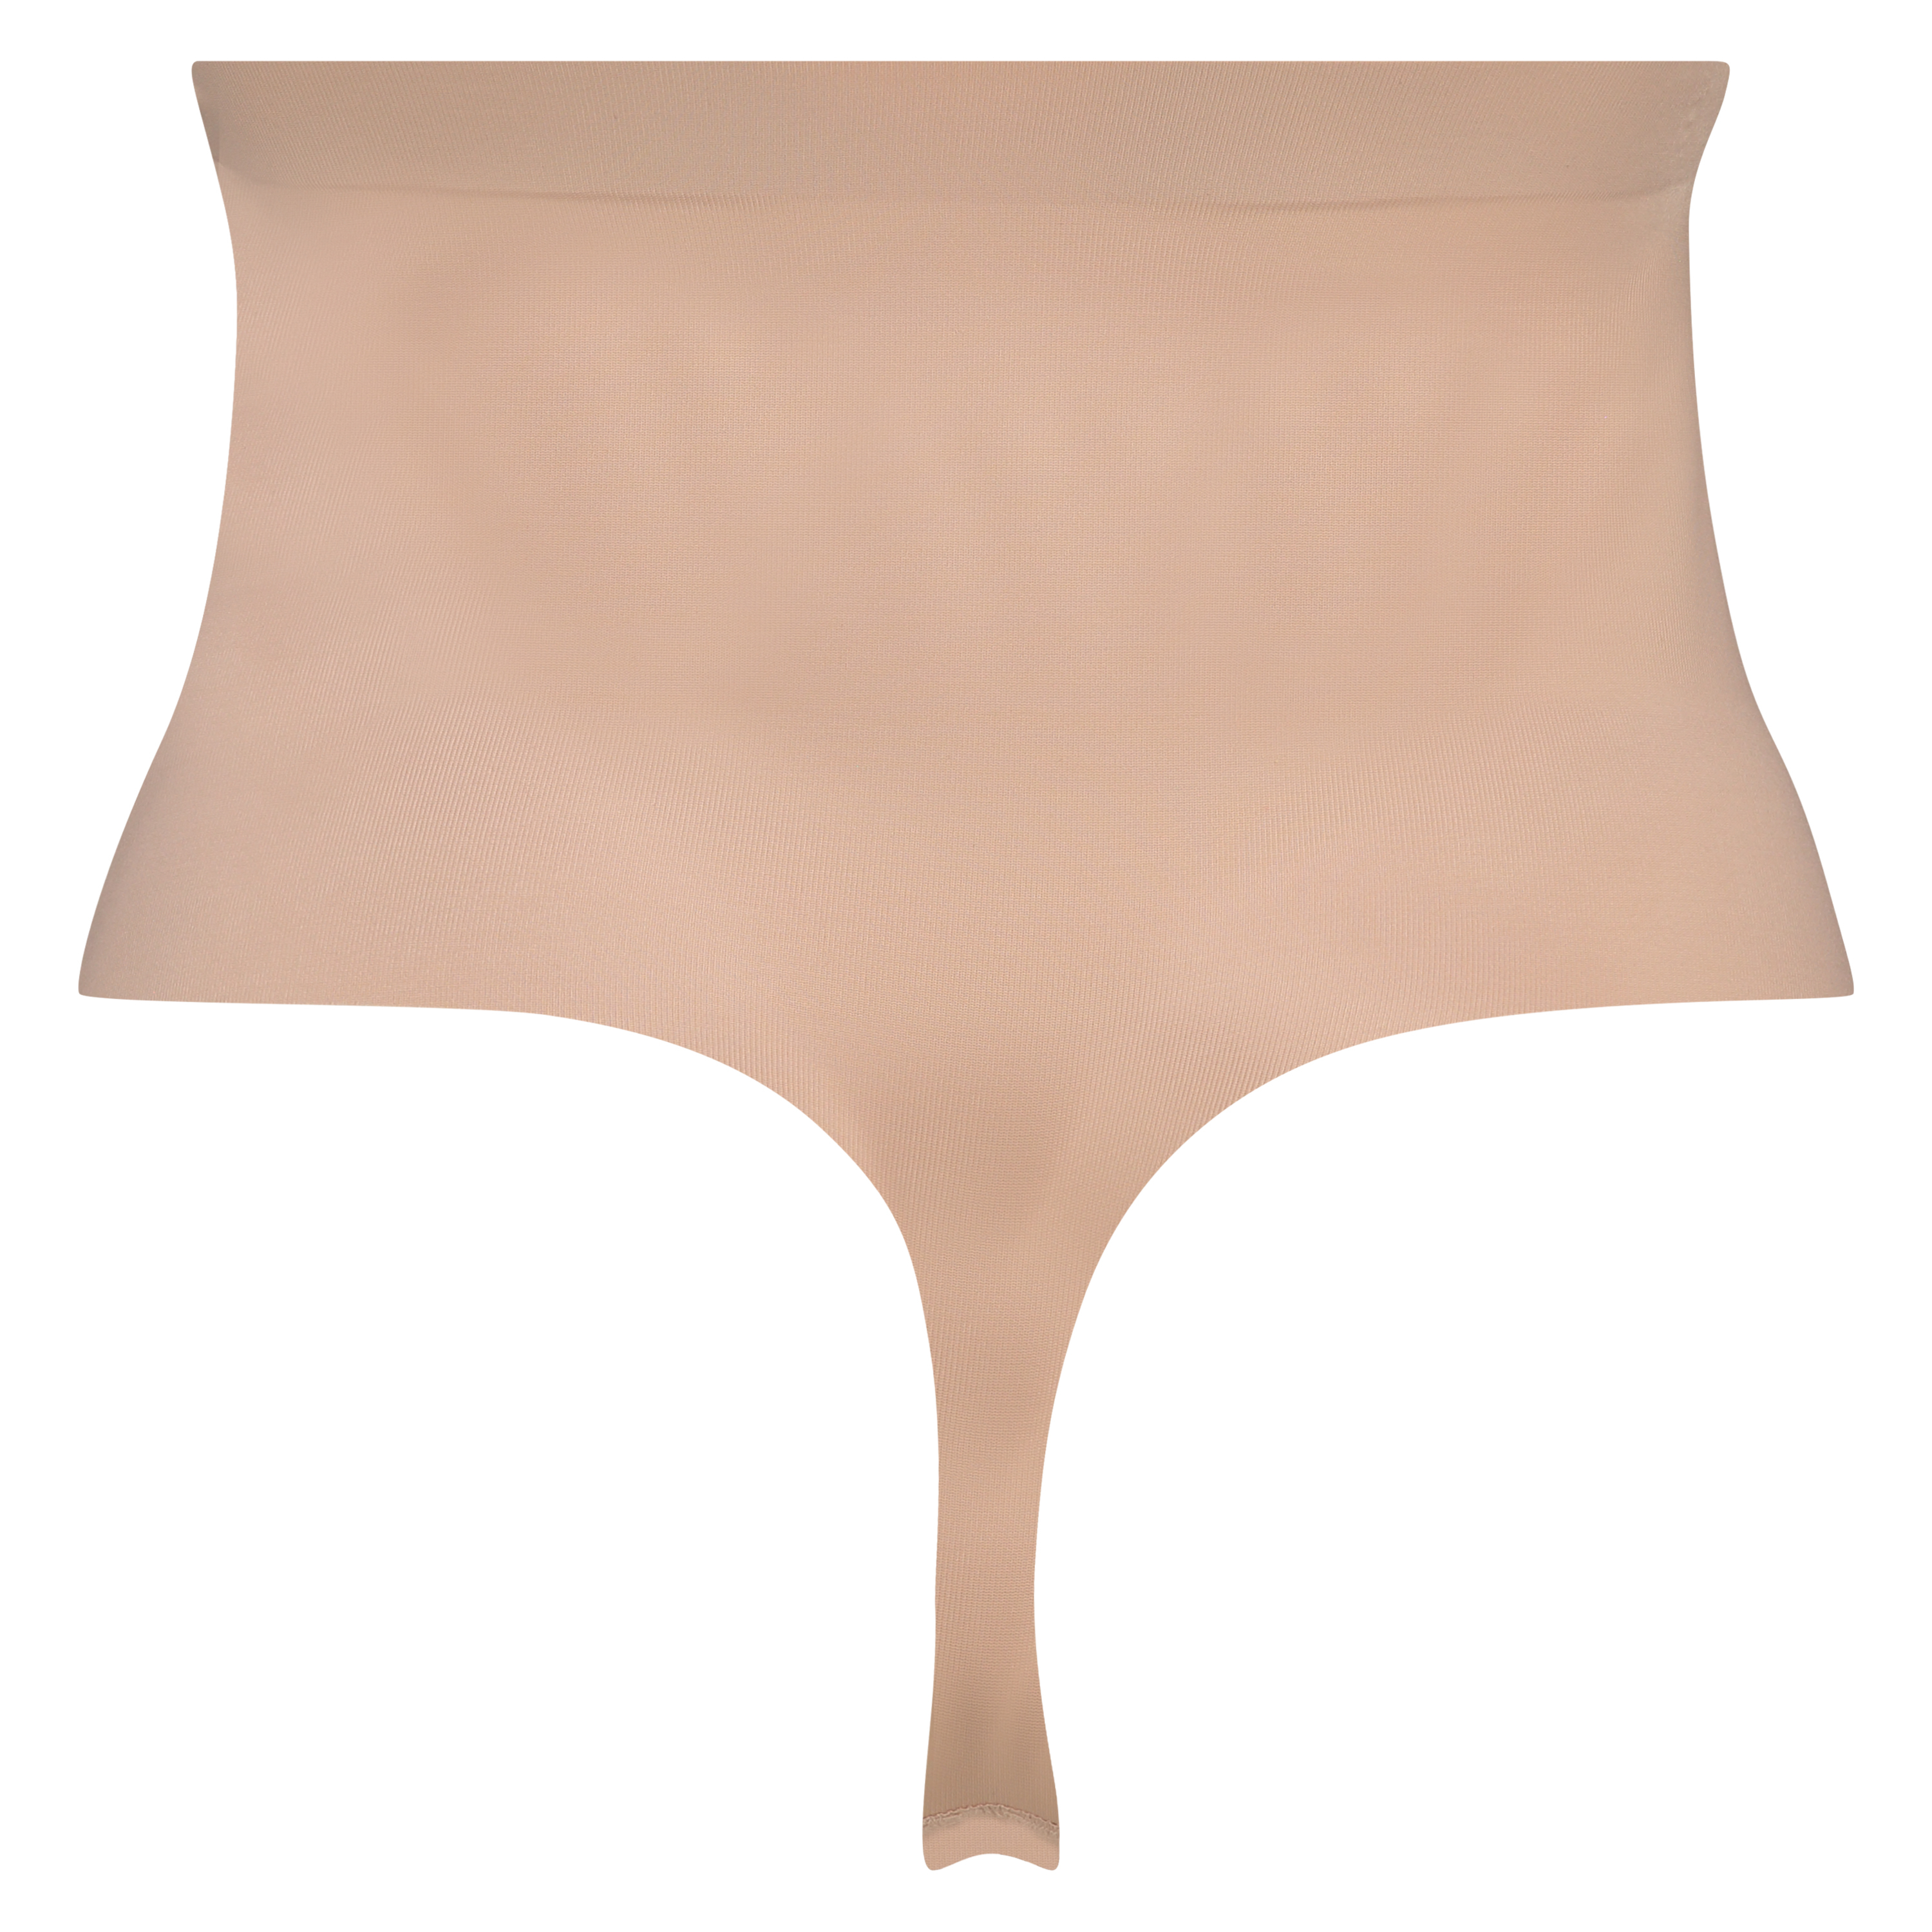 Formender Scuba-Tanga mit hoher Taille, Beige, main